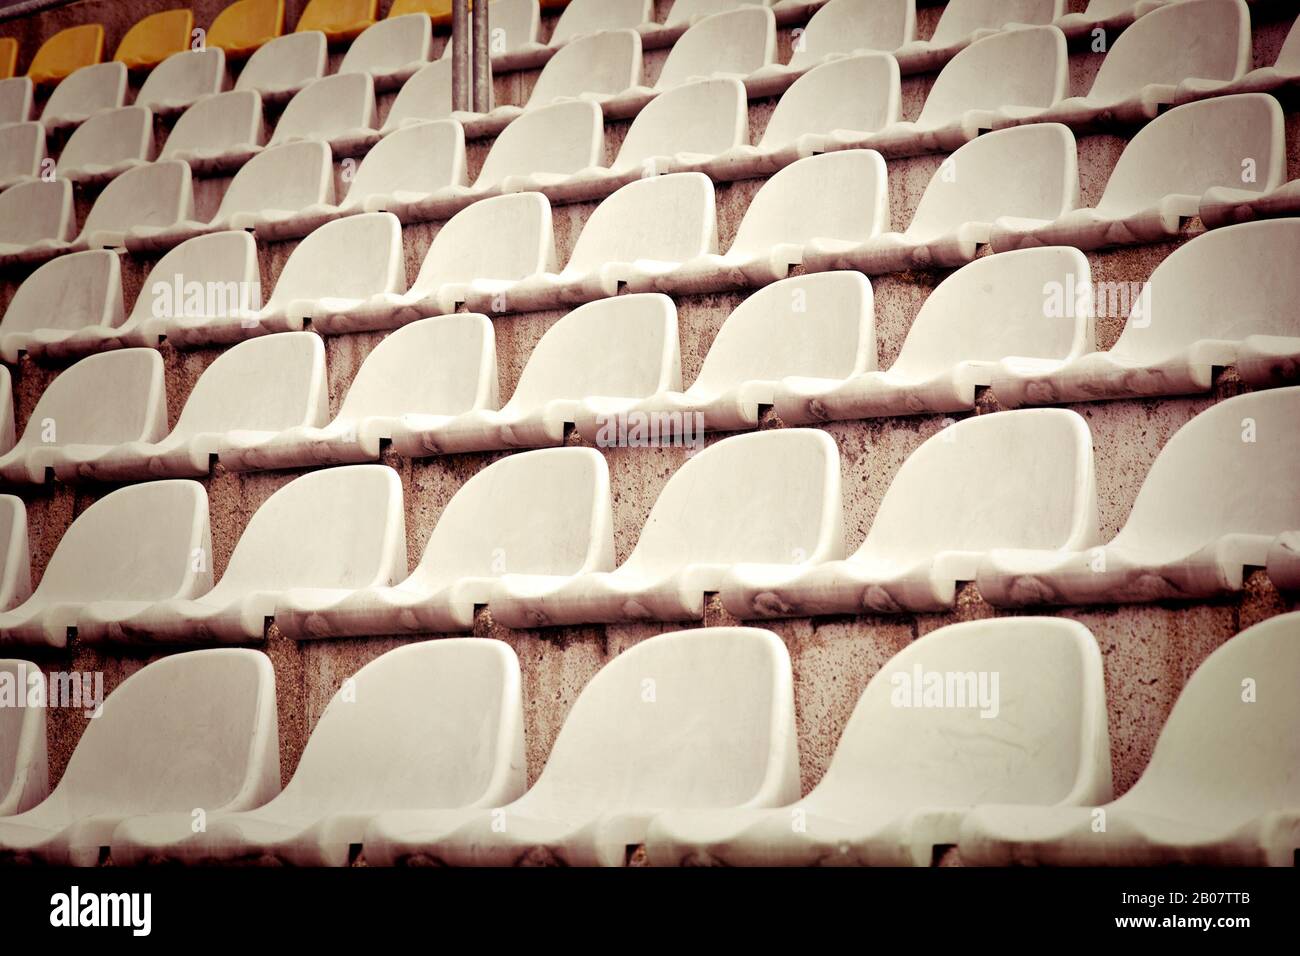 Seats in the stadium stands. Football and sport concept. Stock Photo